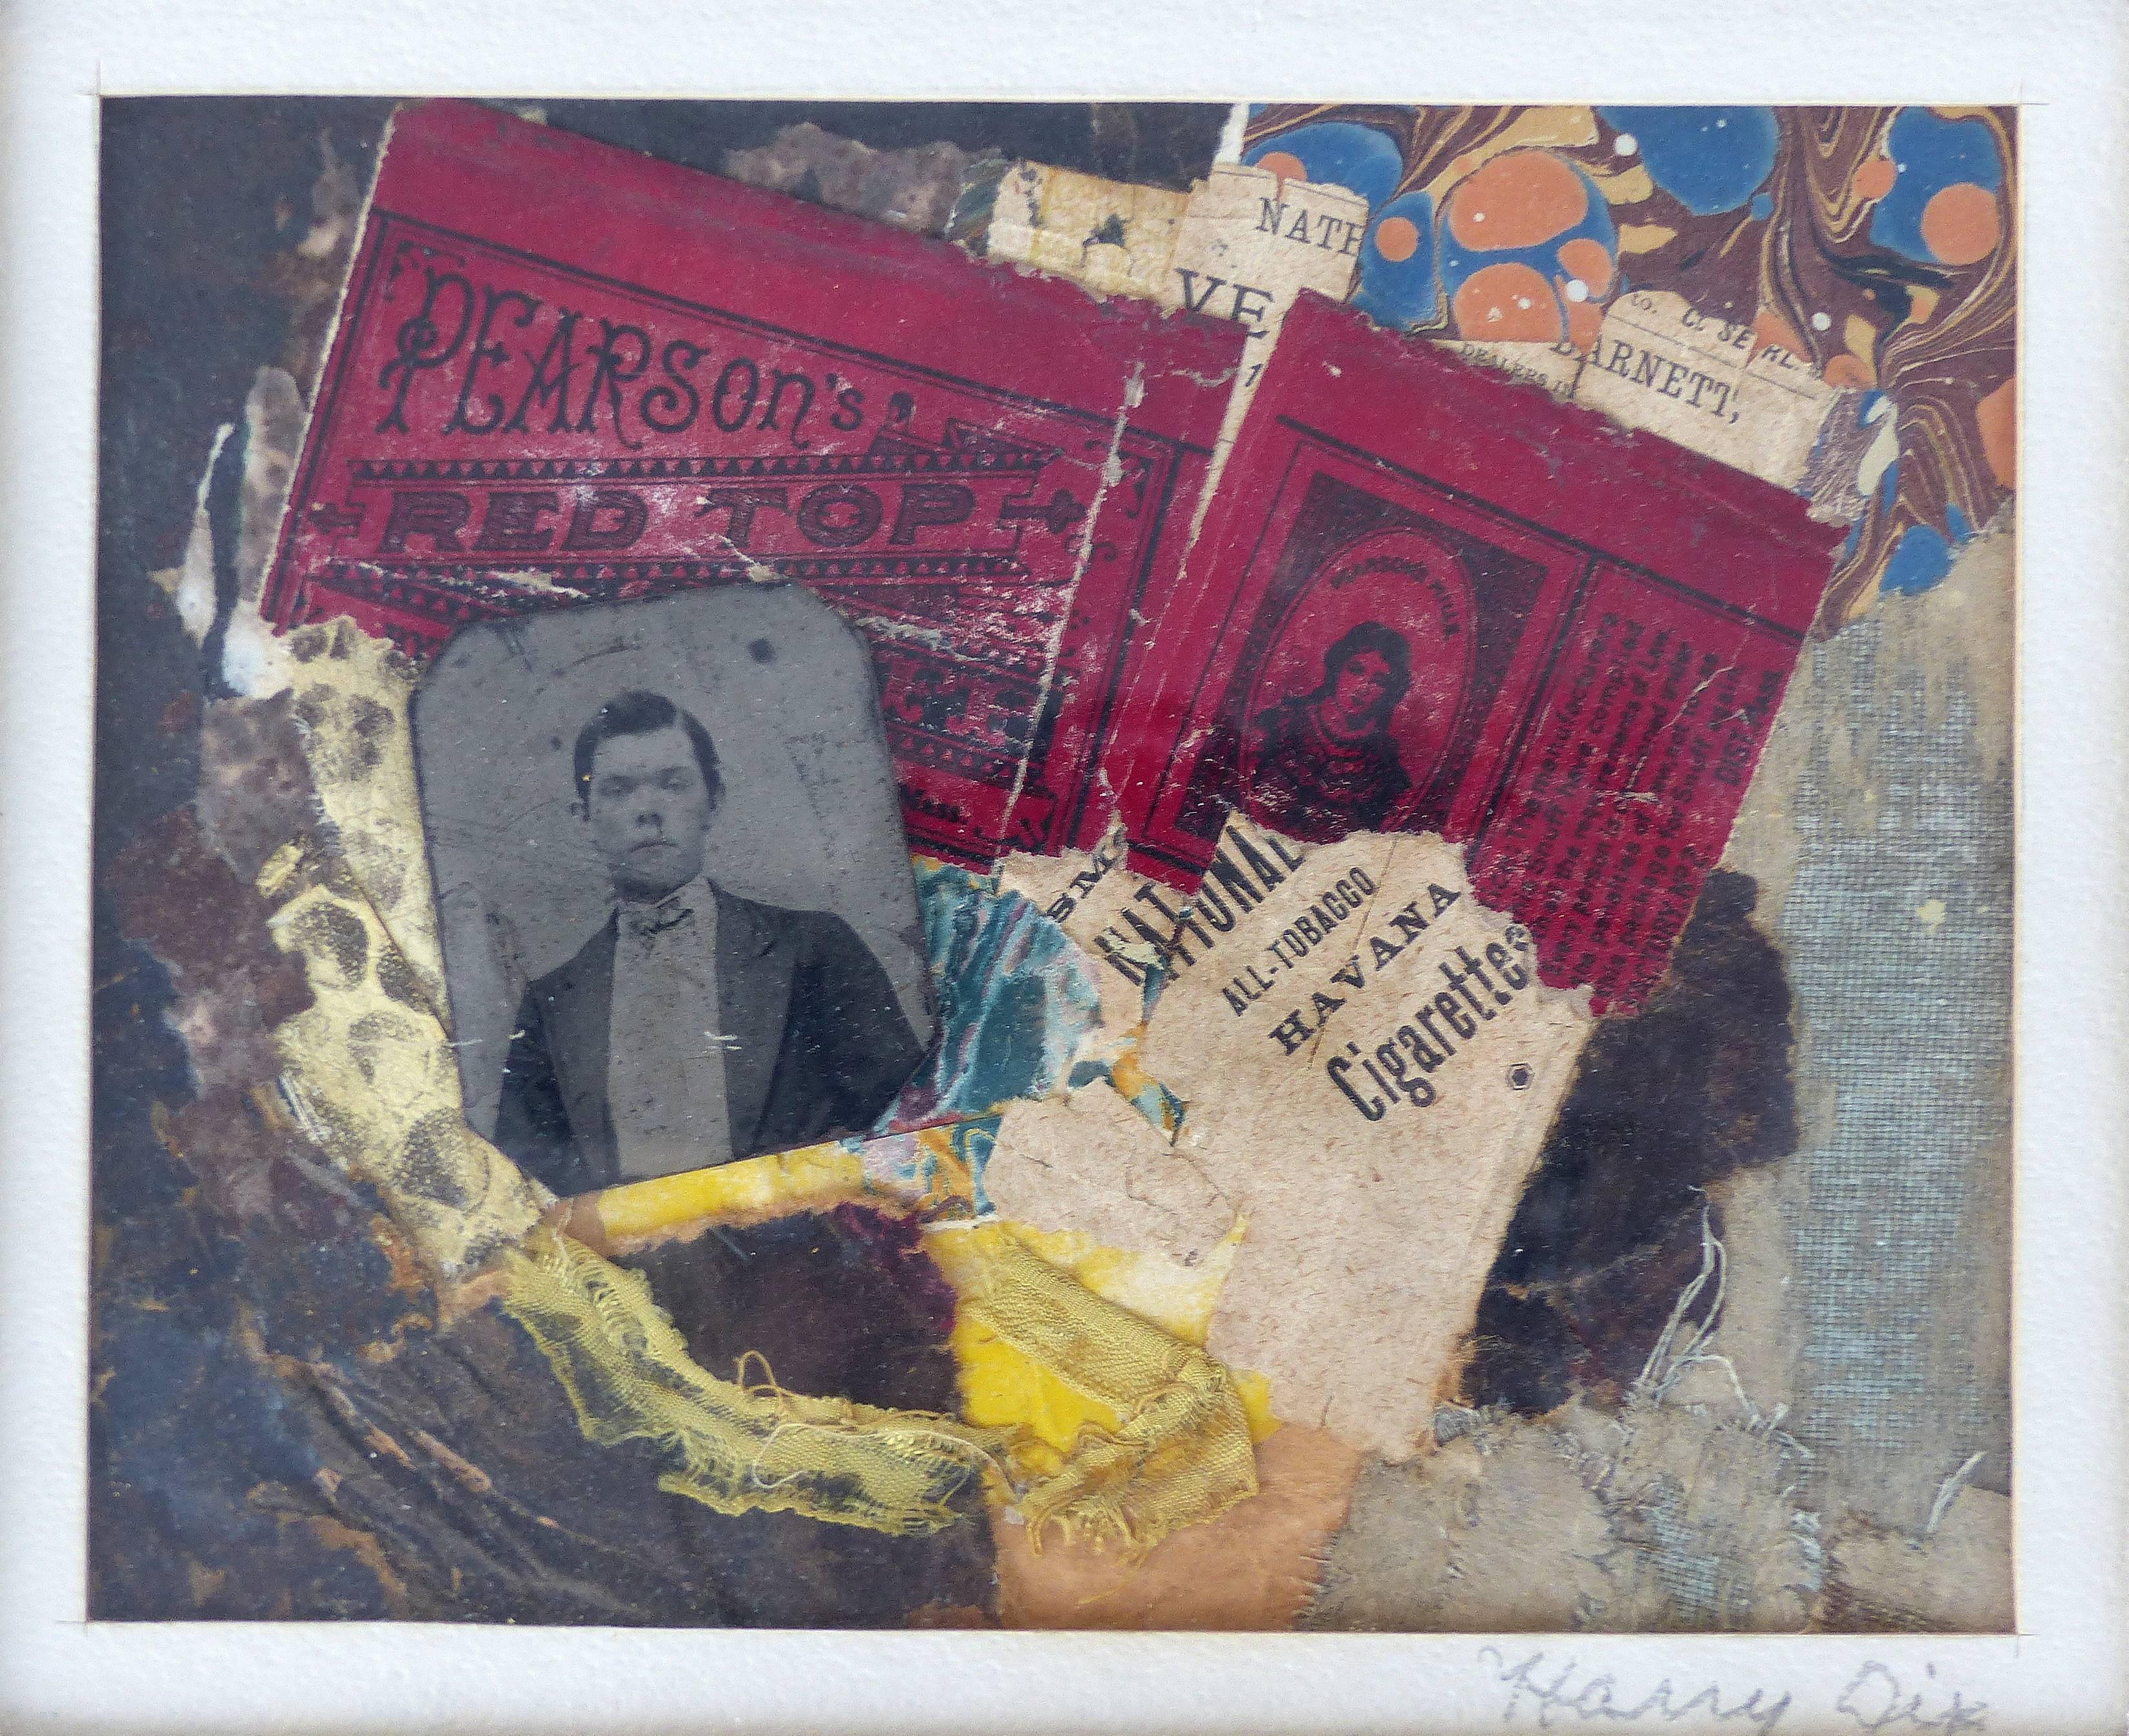 Collage with Tintype by American artist Harry Dix

Offered for sale is a rare and fine collage by important 20th century American artist Harry Dix (1908-1968) which retains original gallery label from Bertha Schaefer gallery in New York and the